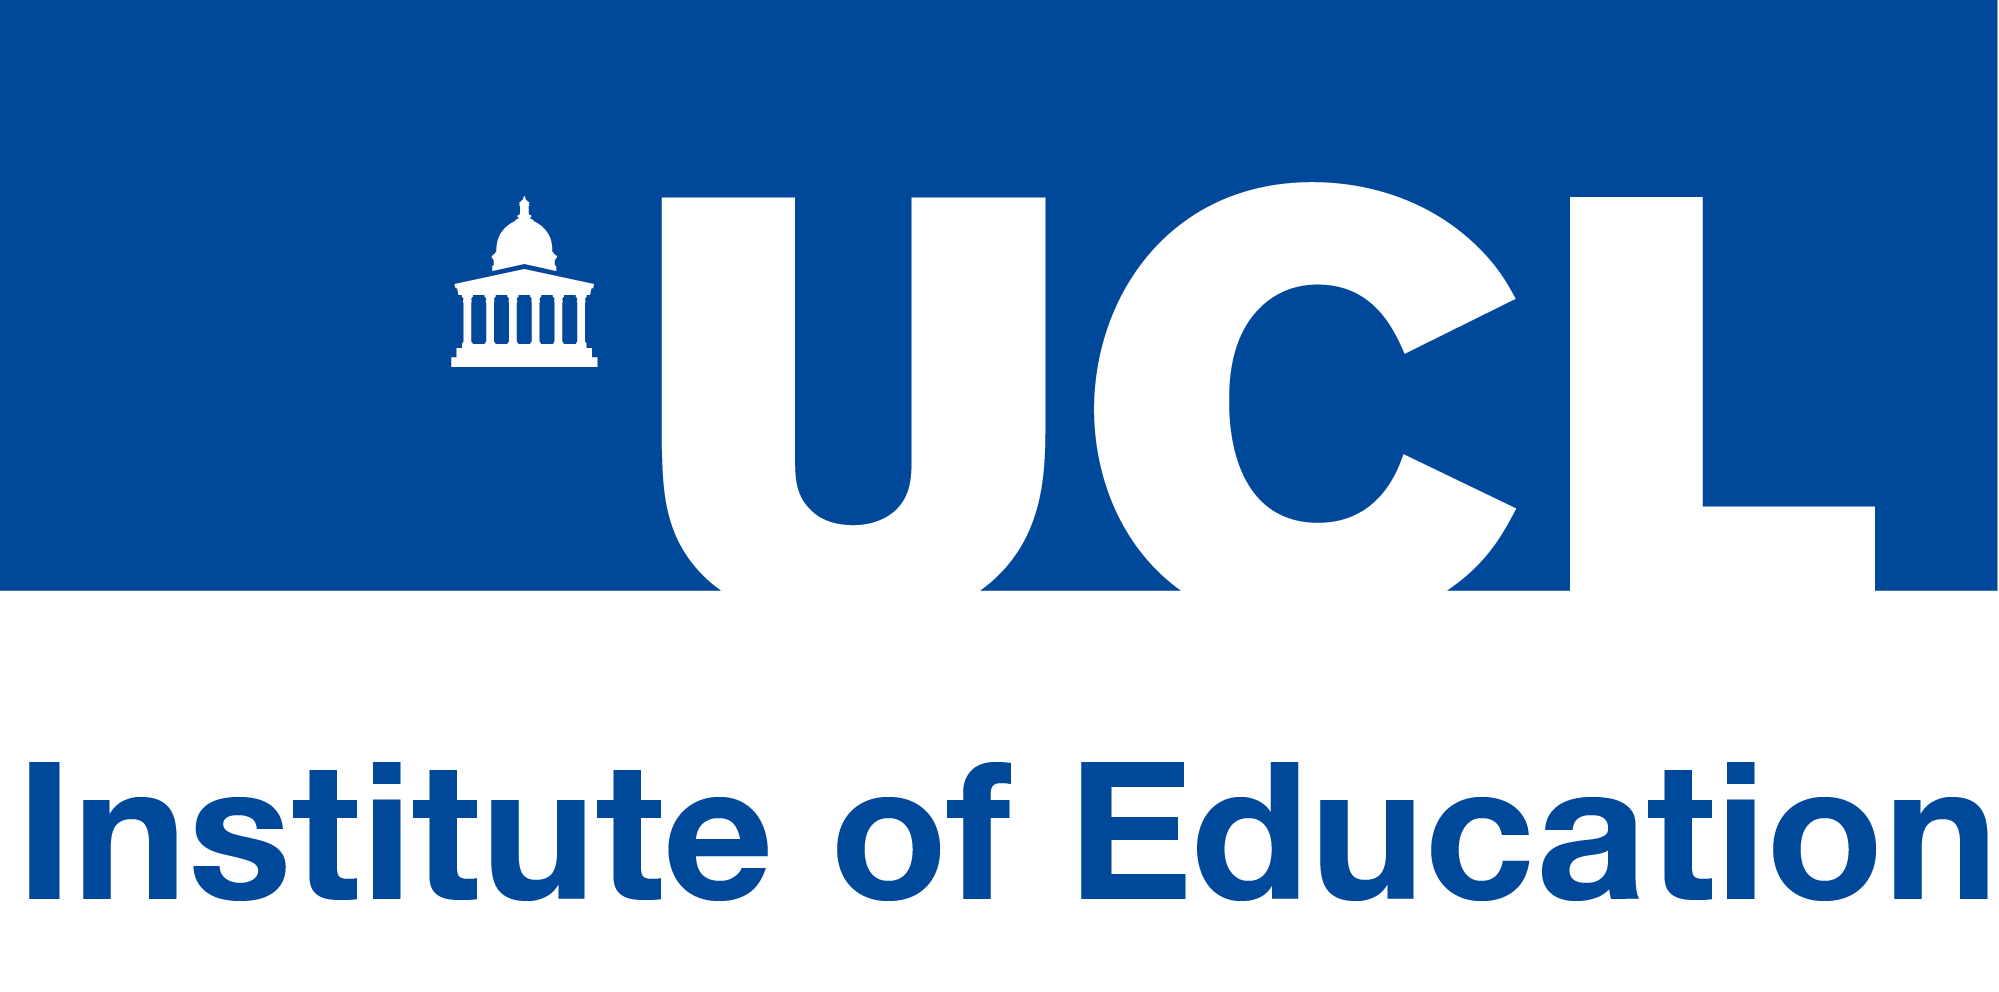 UCL Institute of Education logo